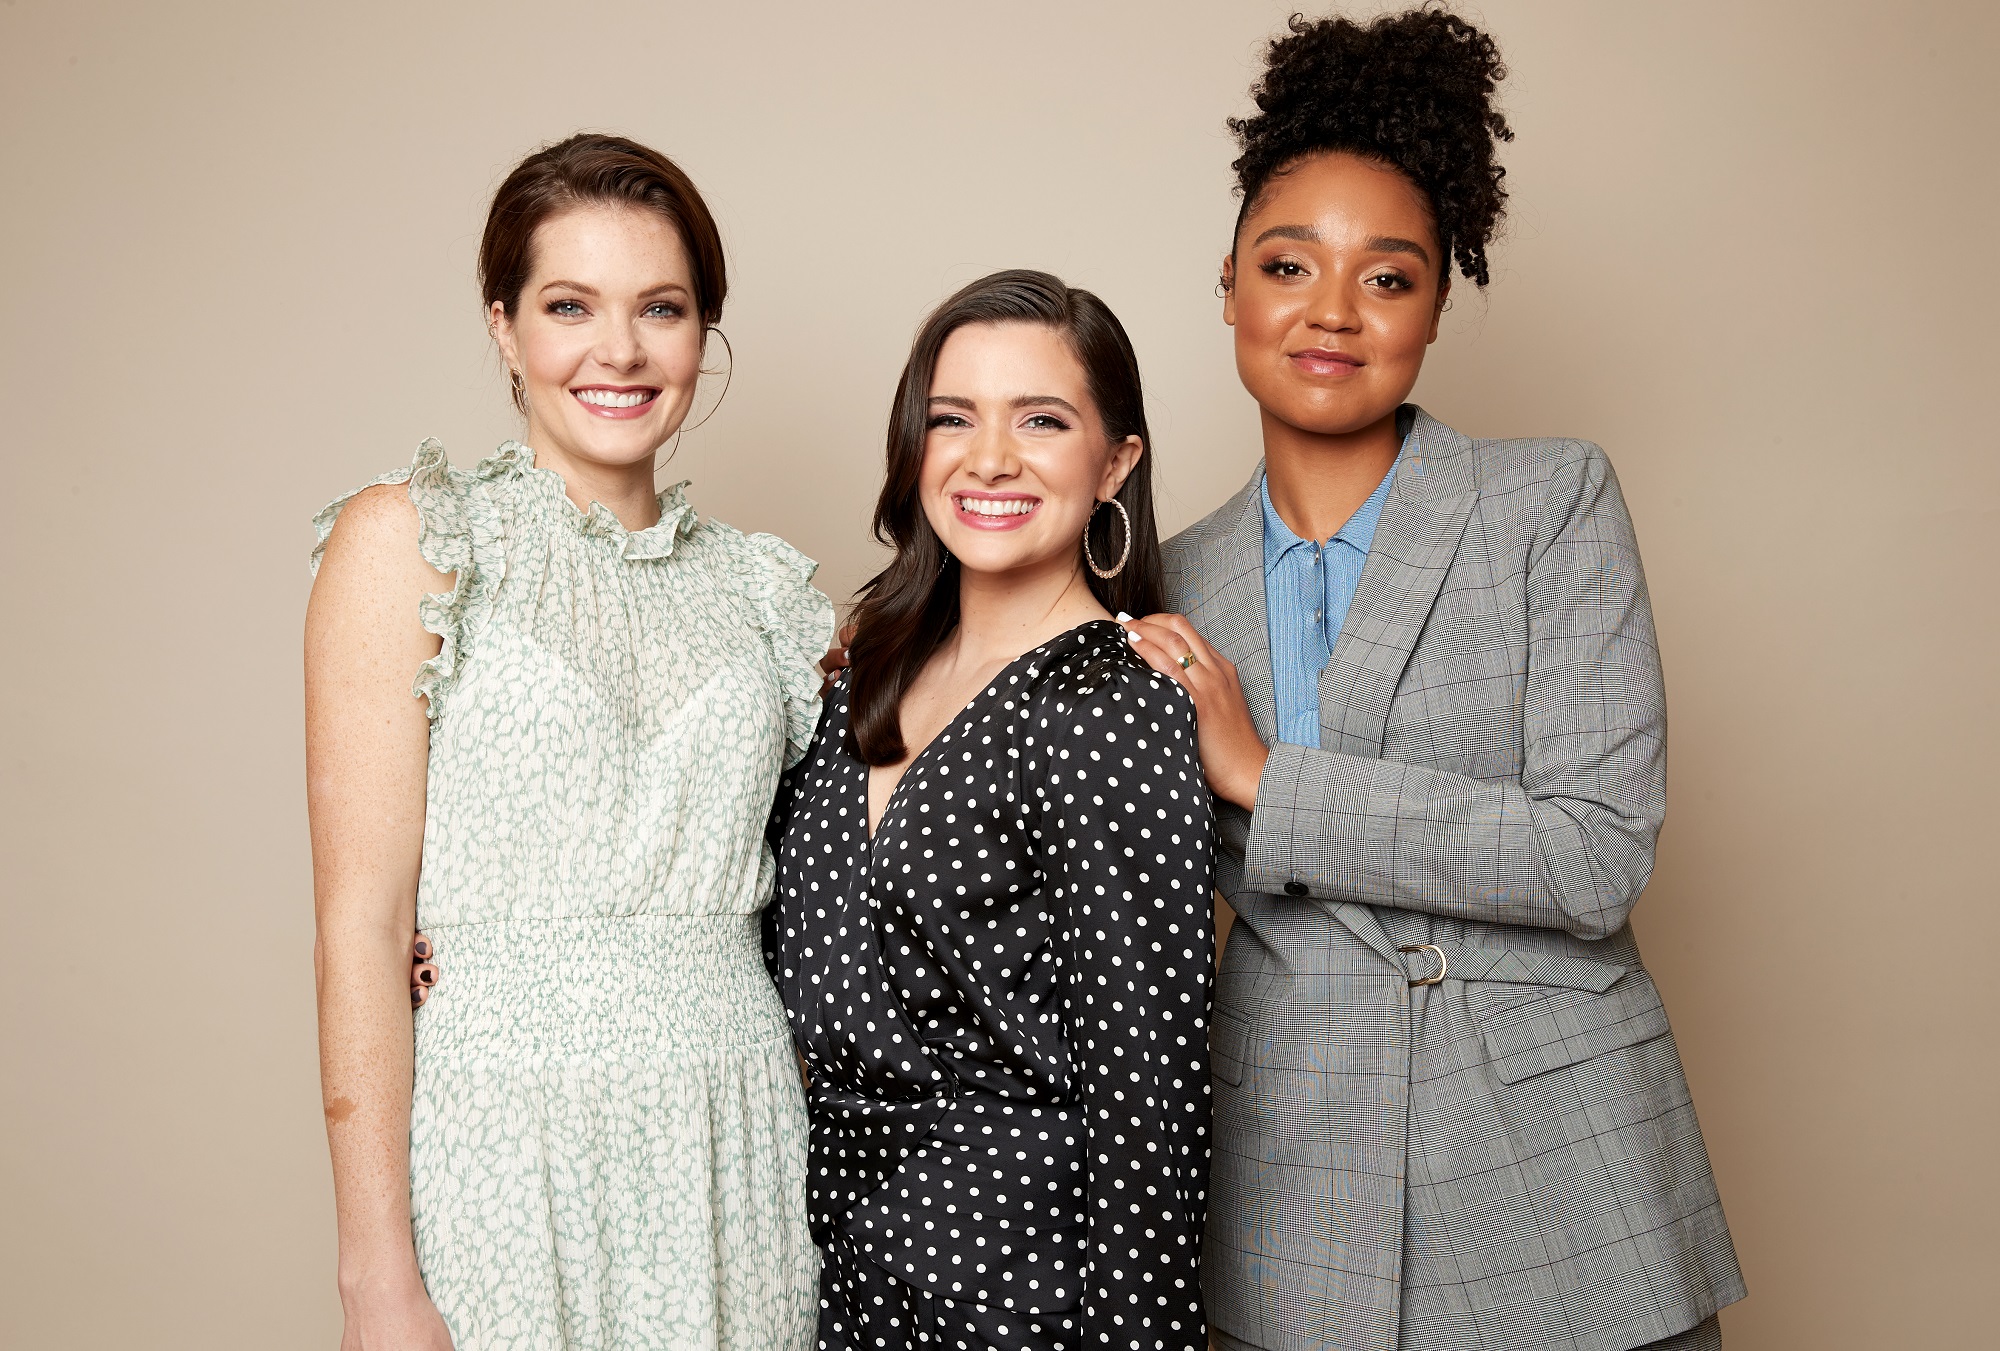 Meghann Fahy, Katie Stevens and Aisha Dee of 'The Bold Type' at the 2019 Winter TCAs on February 5, 2019 in Pasadena, California.